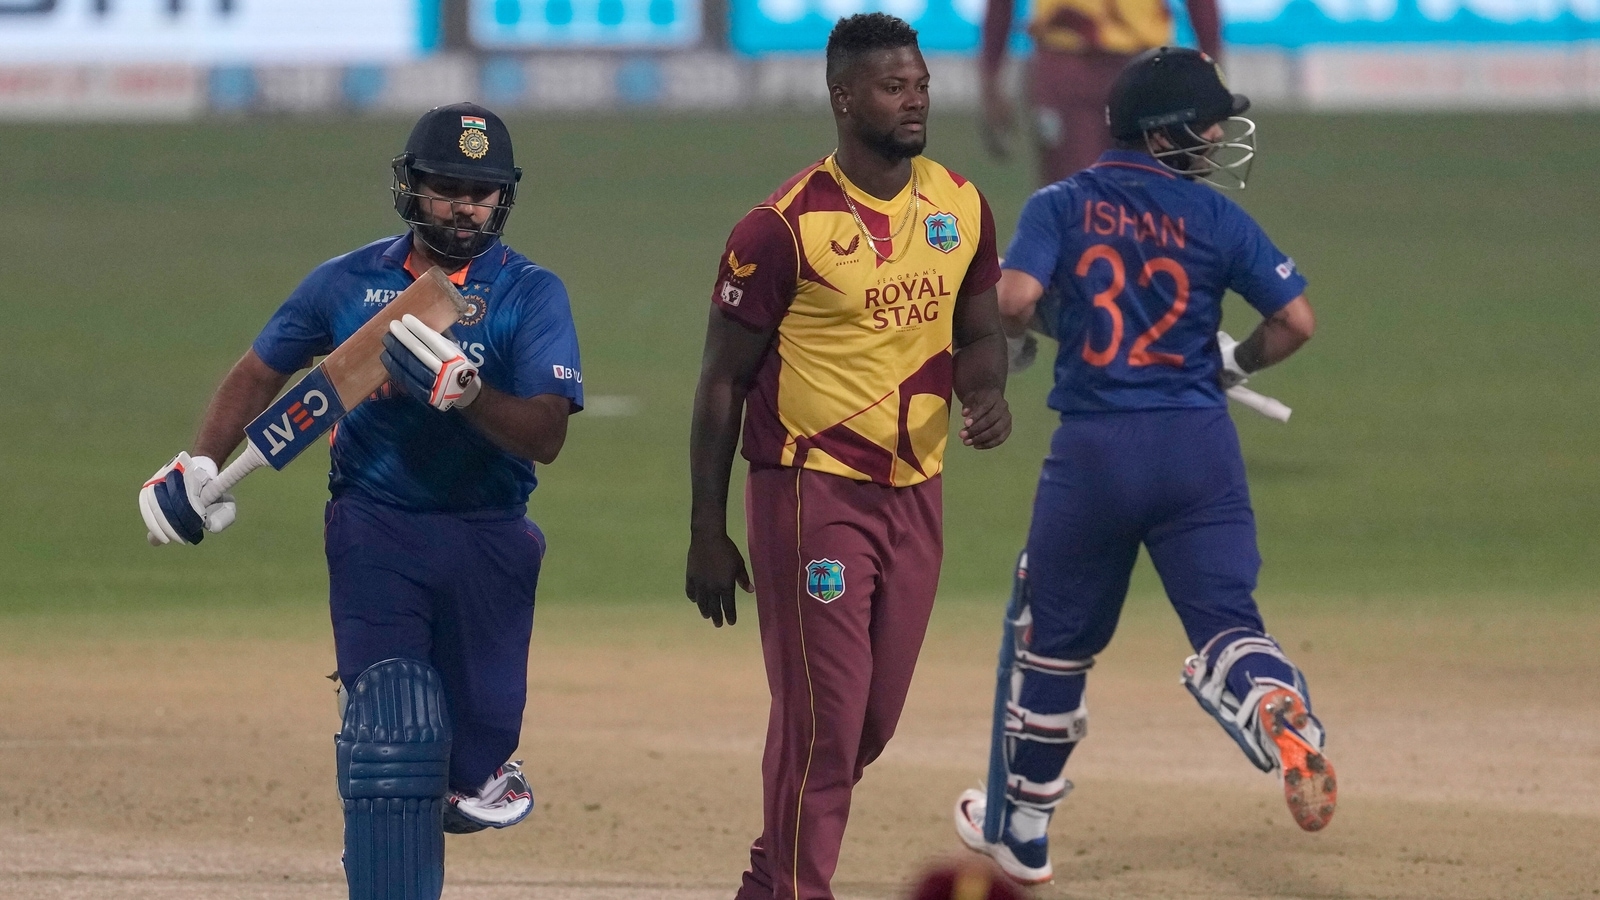 India vs West Indies 1st T20I Highlights: India win by six wickets, take 1-0 lead | Hindustan Times